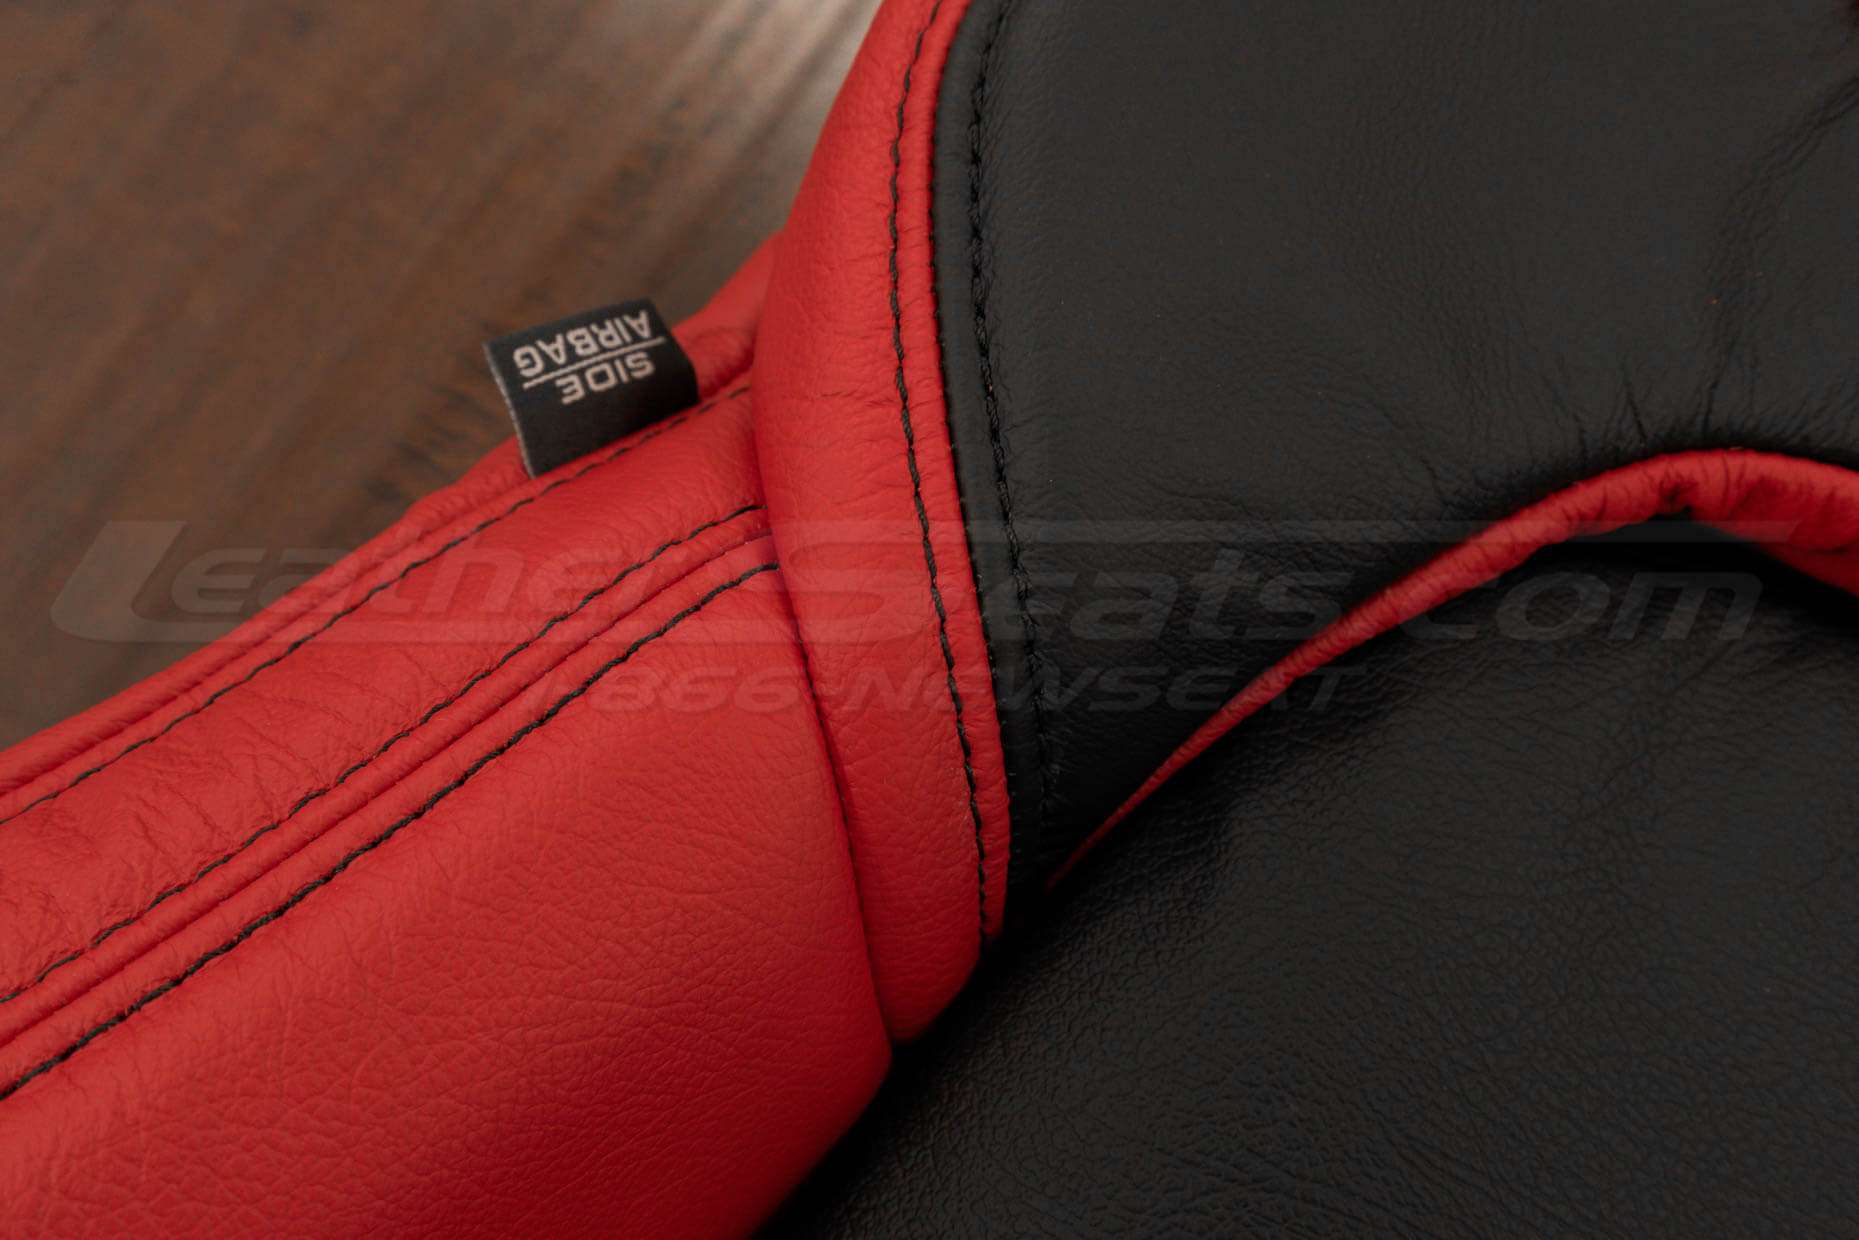 Black double-stitching with airbag tag